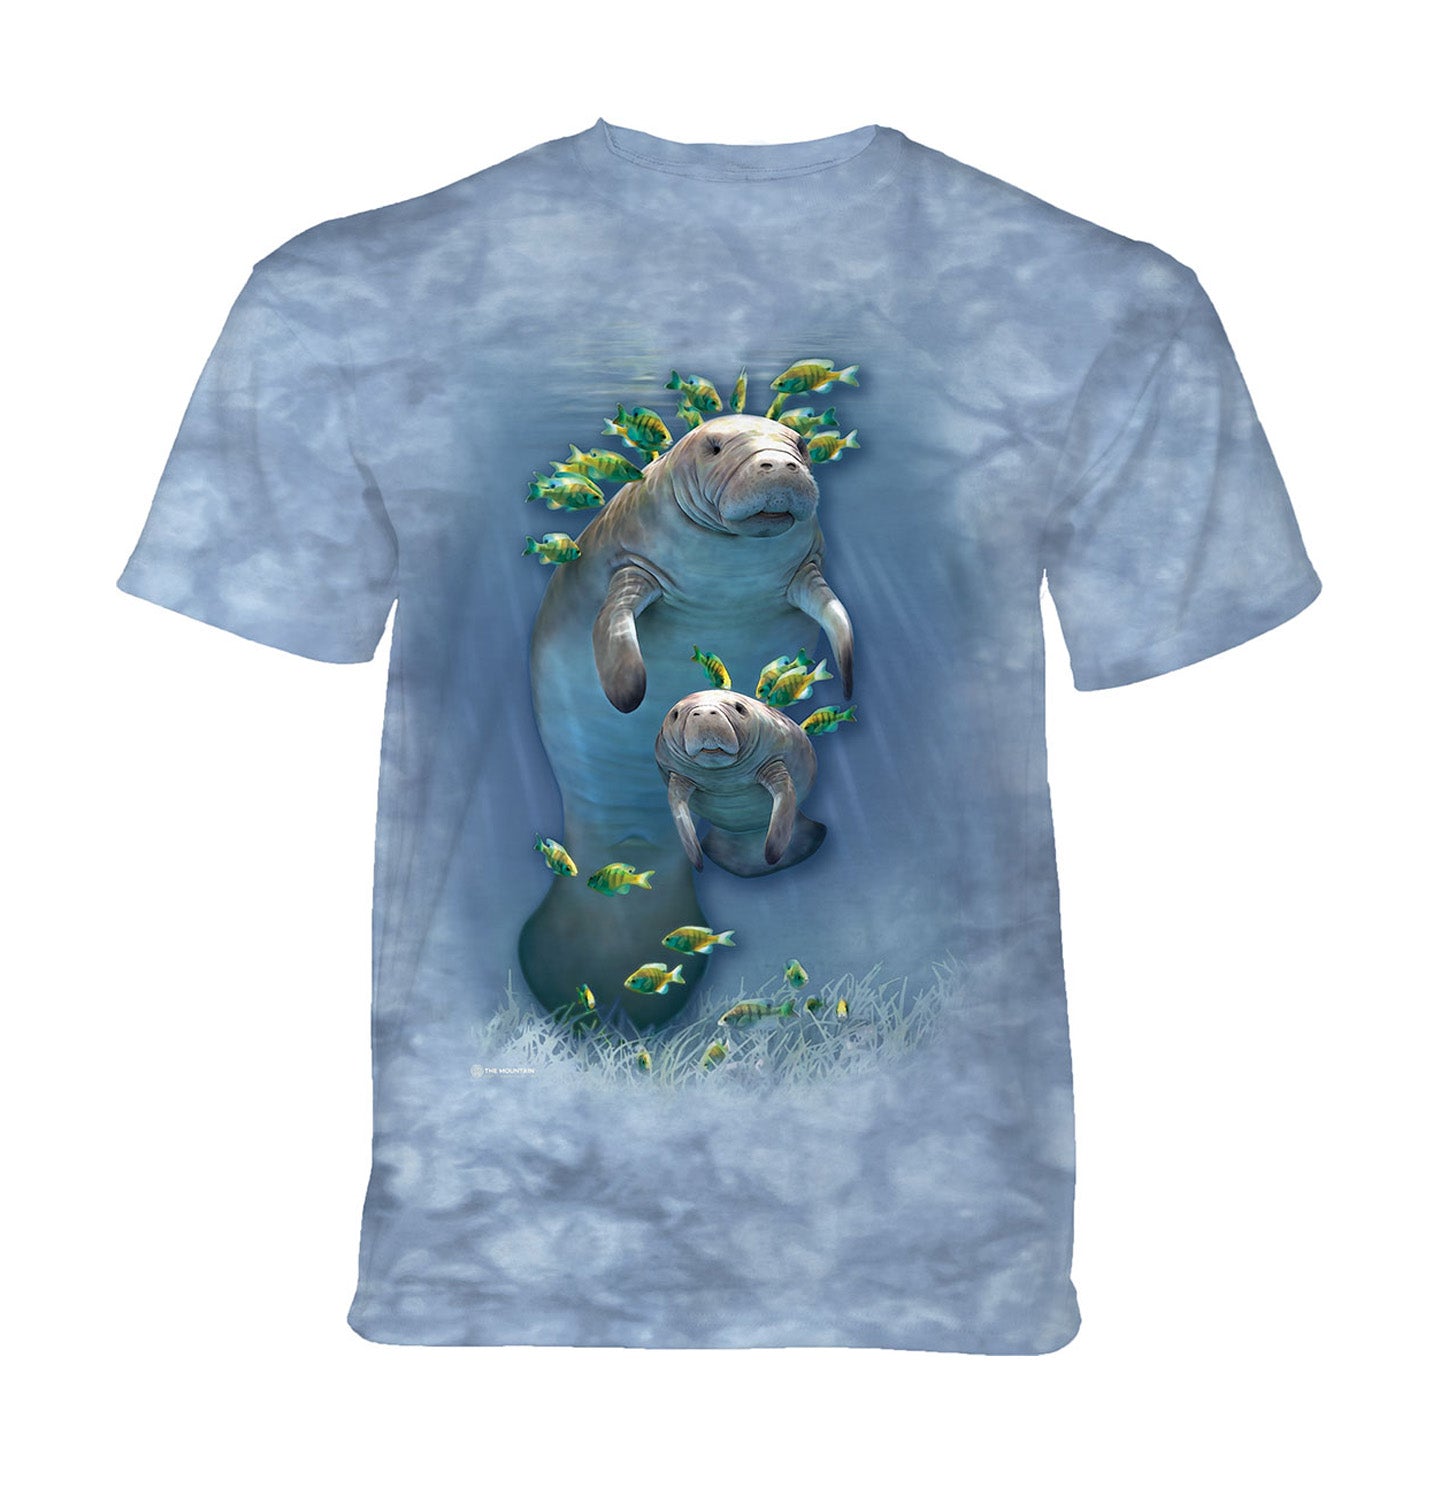 The Mountain - Sea Cow and Calf - Kids' Unisex T-Shirt